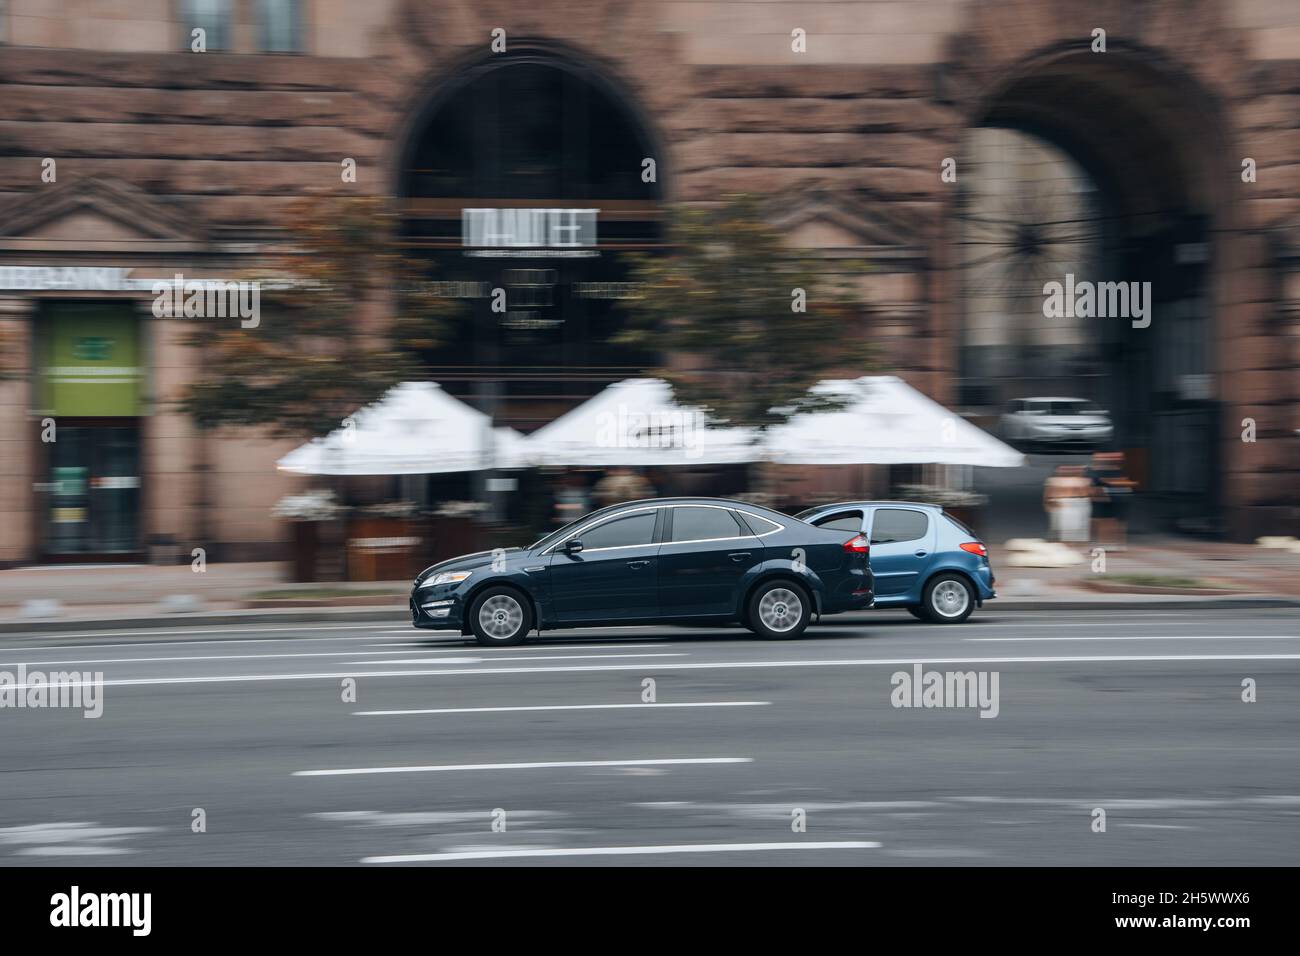 Ukraine, Kyiv - 2 June 2021: Blue Ford Mondeo car moving on the street. Editorial Stock Photo